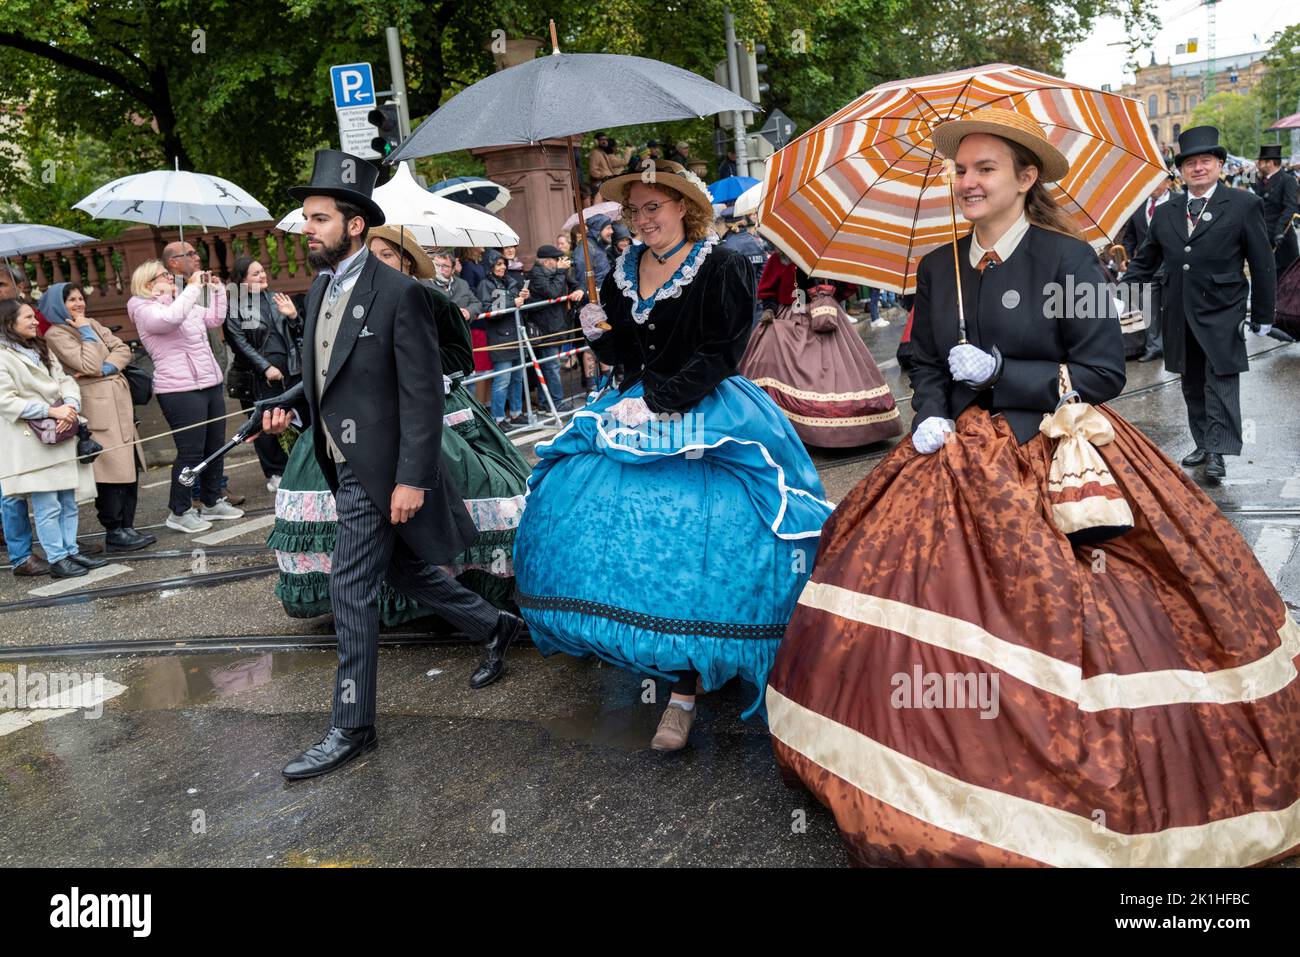 Munich, Germany.  18 Sep, 2022. The Oktoberfest Costume and Riflemen's Parade took place today with early showers failing to dampen the spirits of all involved. Saturday's official opening saw crowds down on the last time the Oktoberfest was held but there were considerably more people out and about today despite the rain. Credit: Clearpiximages/Alamy Live News Stock Photo